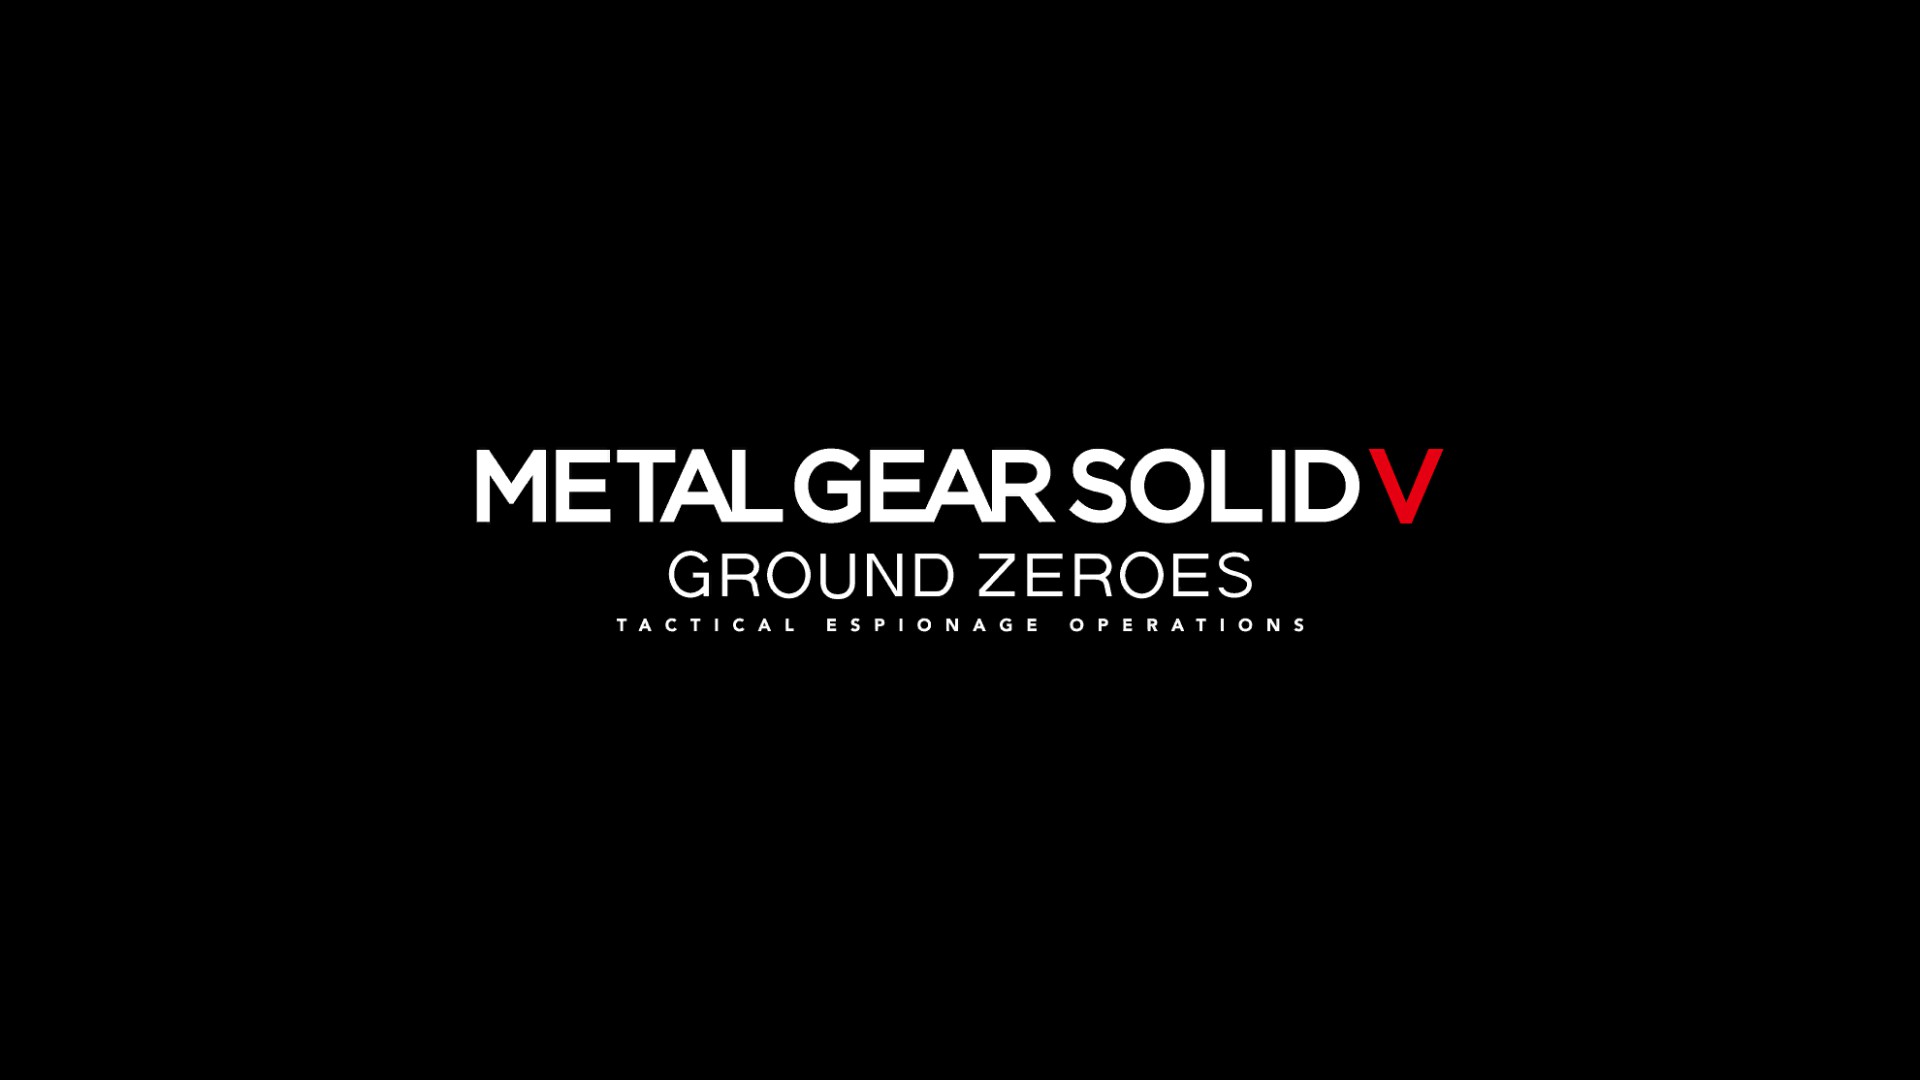 Video Game Metal Gear Solid V Ground Zeroes 1920x1080